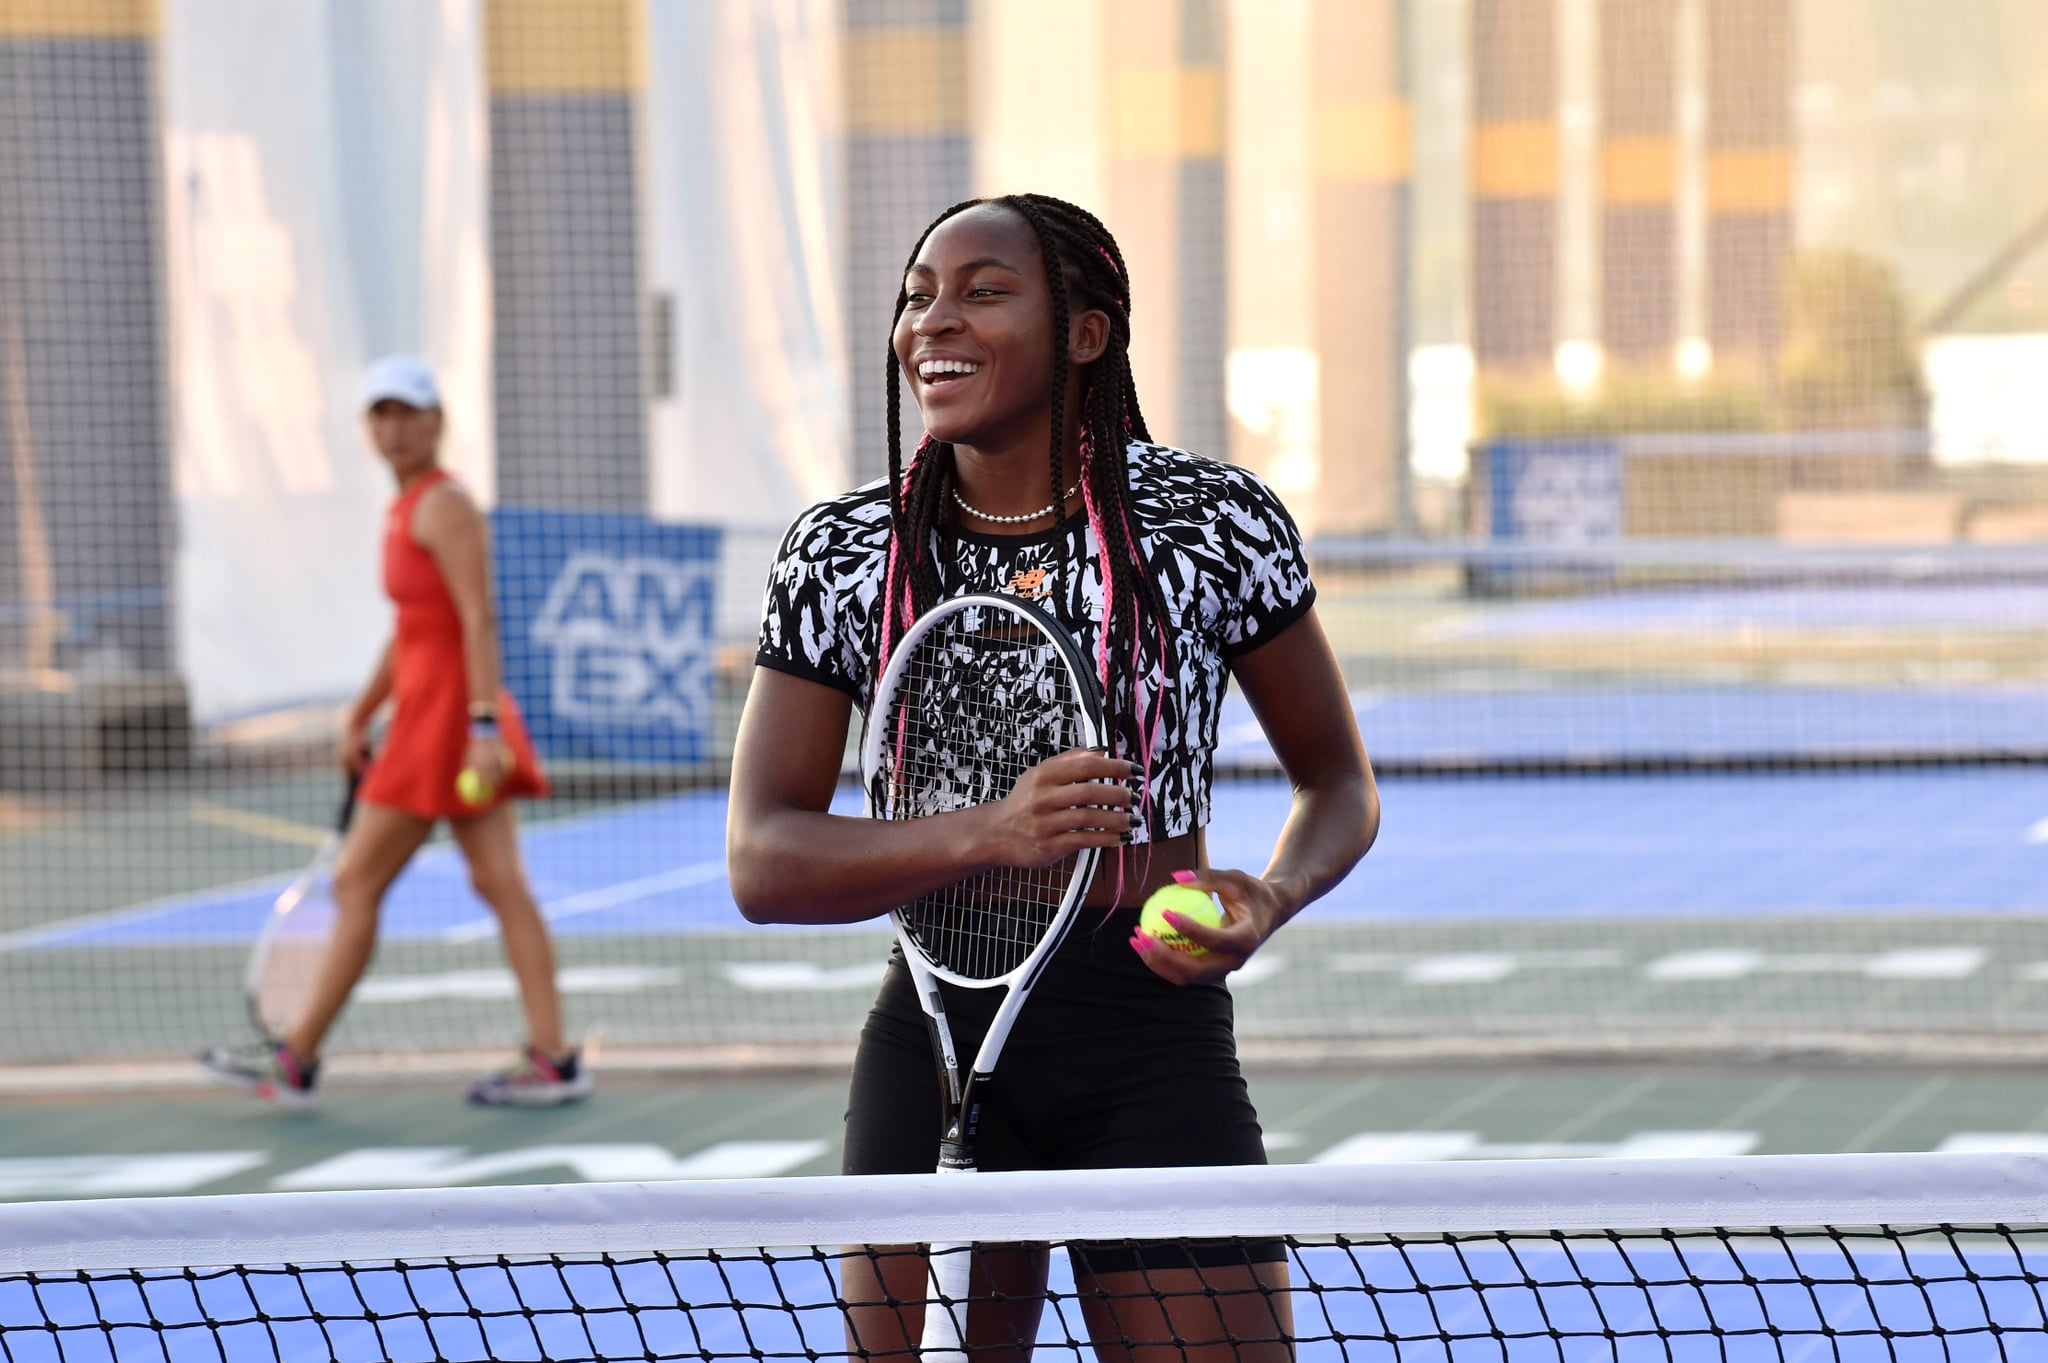 NEW YORK, NEW YORK - AUGUST 24: (EDITORIAL USE ONLY) American tennis player Coco Gauff attends as the American Express Courts are unveiled ahead of 2021 US Open Tennis Tournament at Hudson River Park's Pier 76 on August 24, 2021 in New York City. (Photo by Bryan Bedder/Getty Images for American Express)